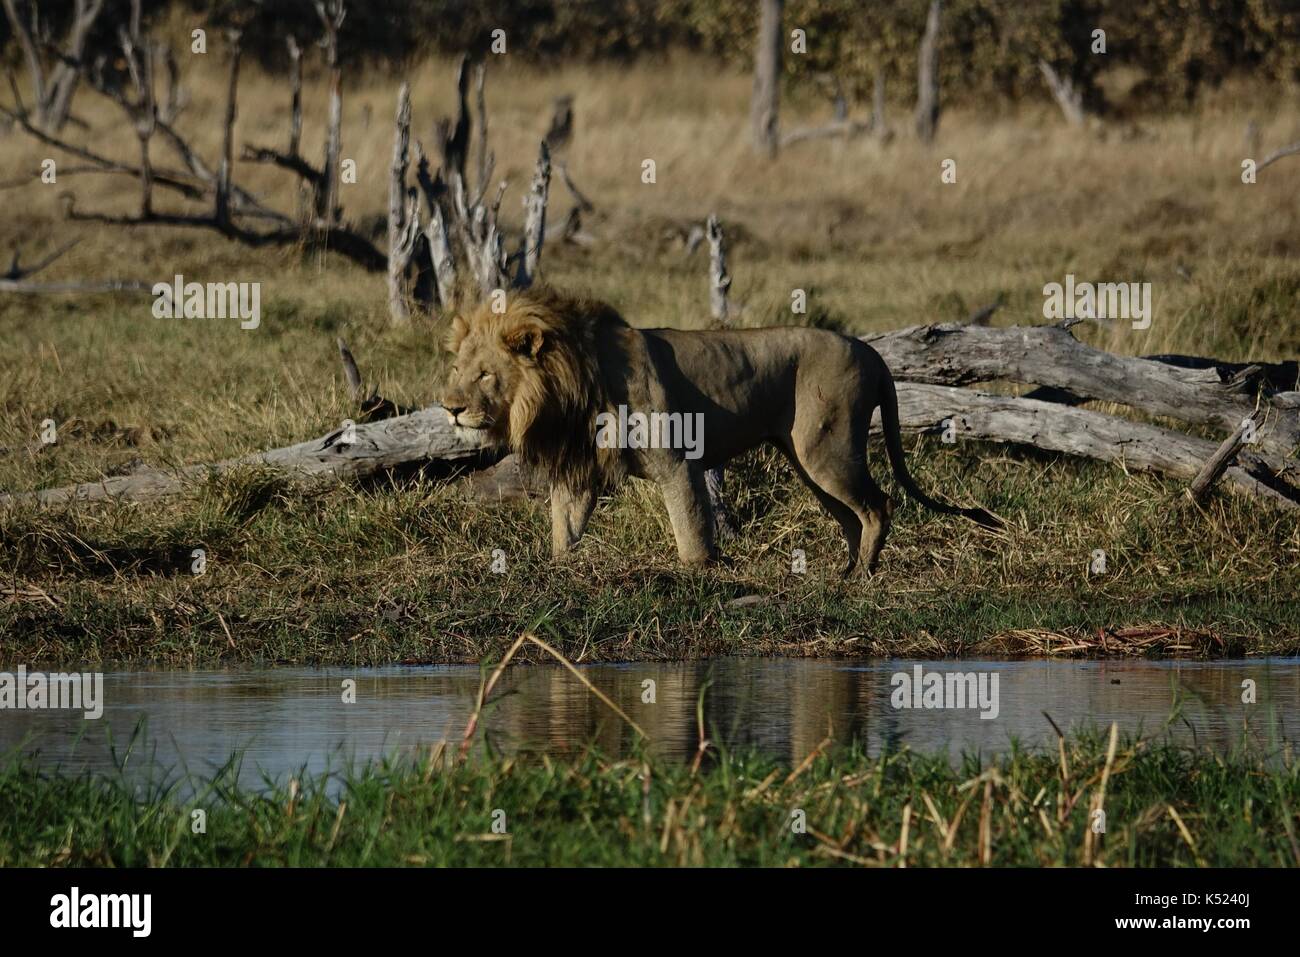 Male lion walking at river Stock Photo